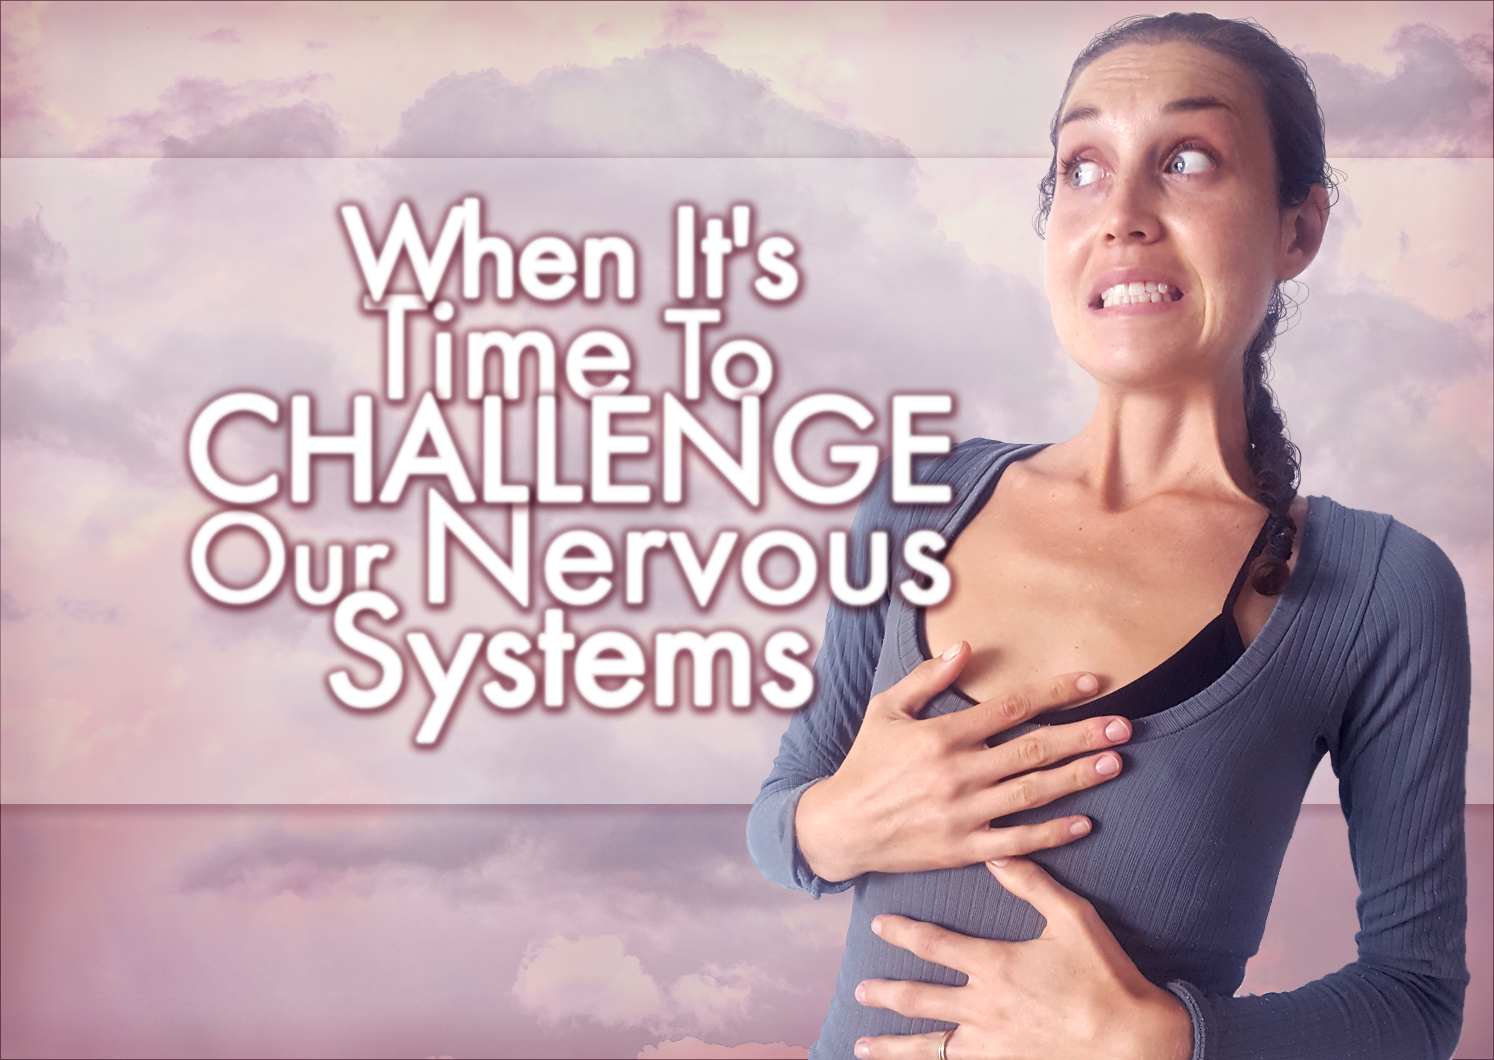 When It’s Time To CHALLENGE Our Nervous Systems